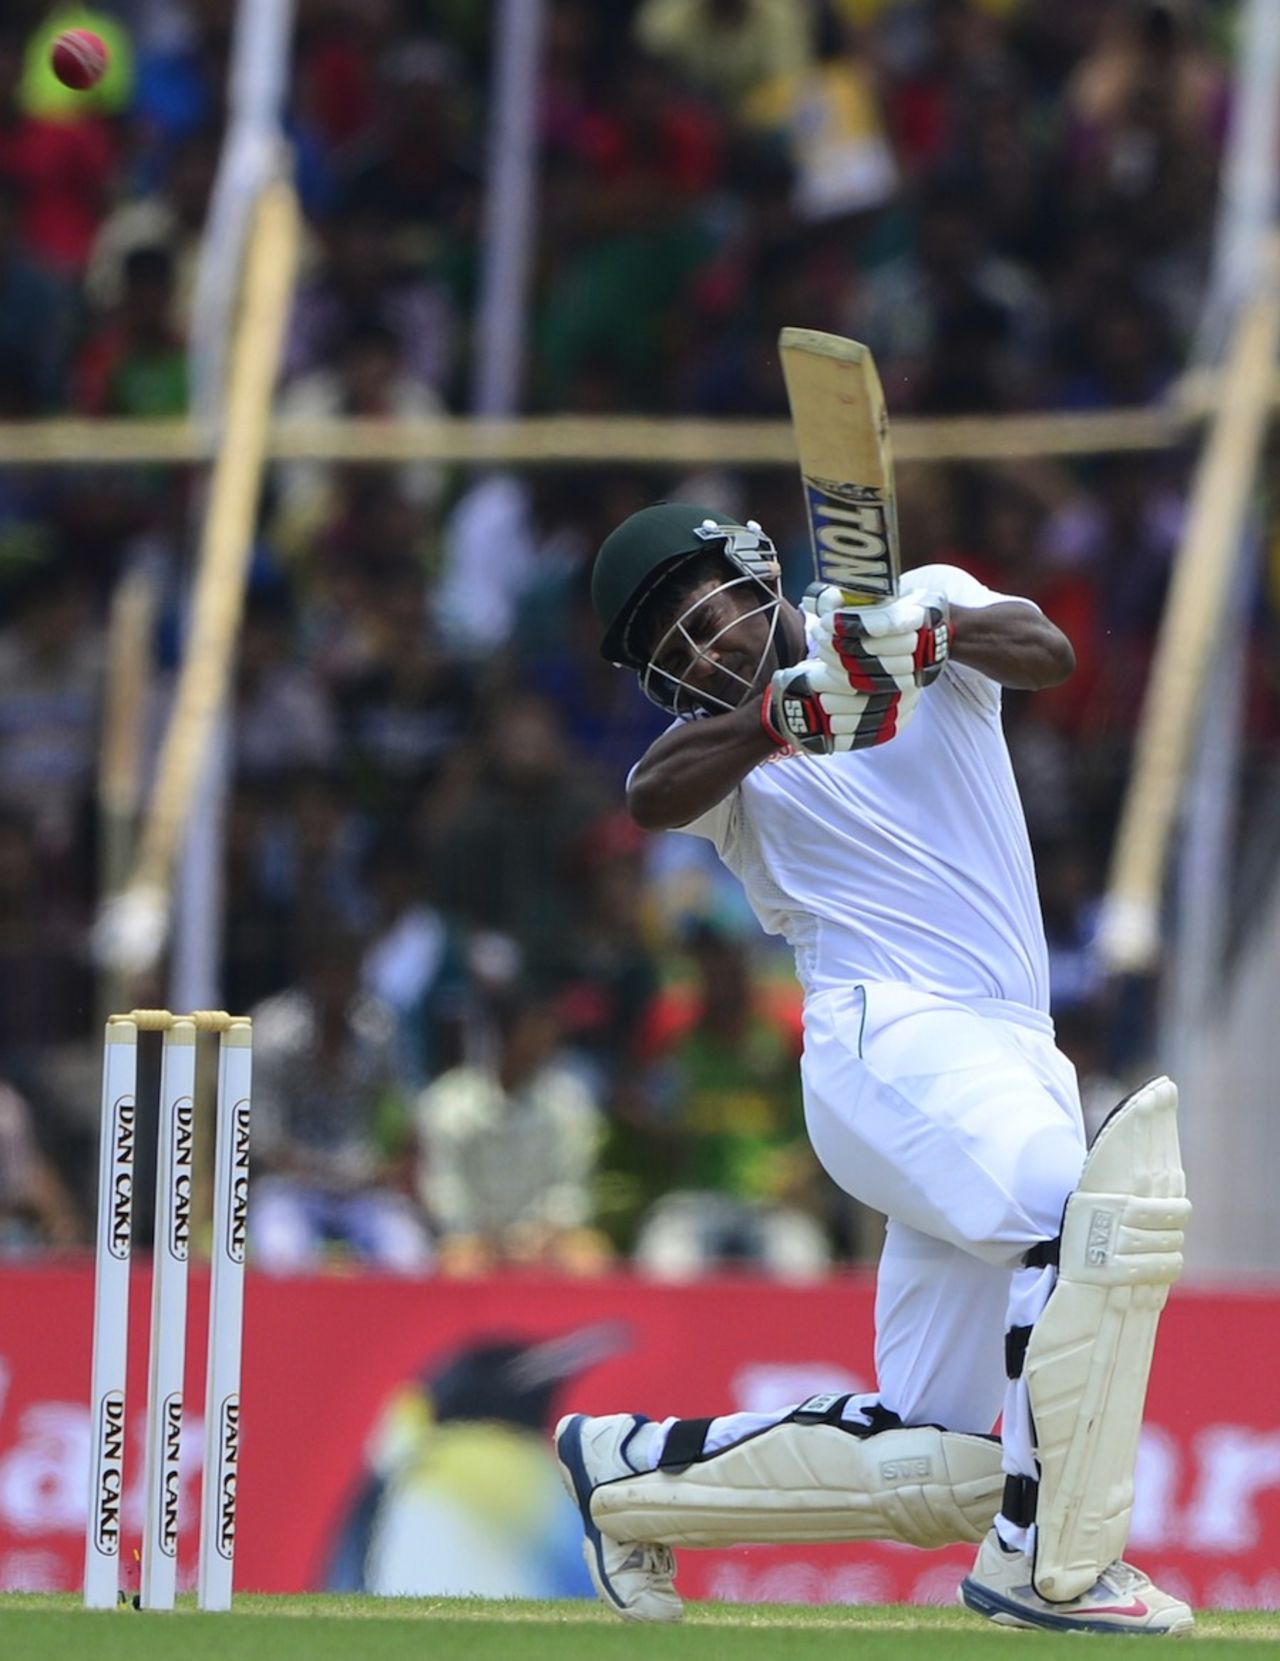 Imrul Kayes attempts to pull, Bangladesh v Pakistan, 1st Test, Khulna, 1st day, April 28, 2015